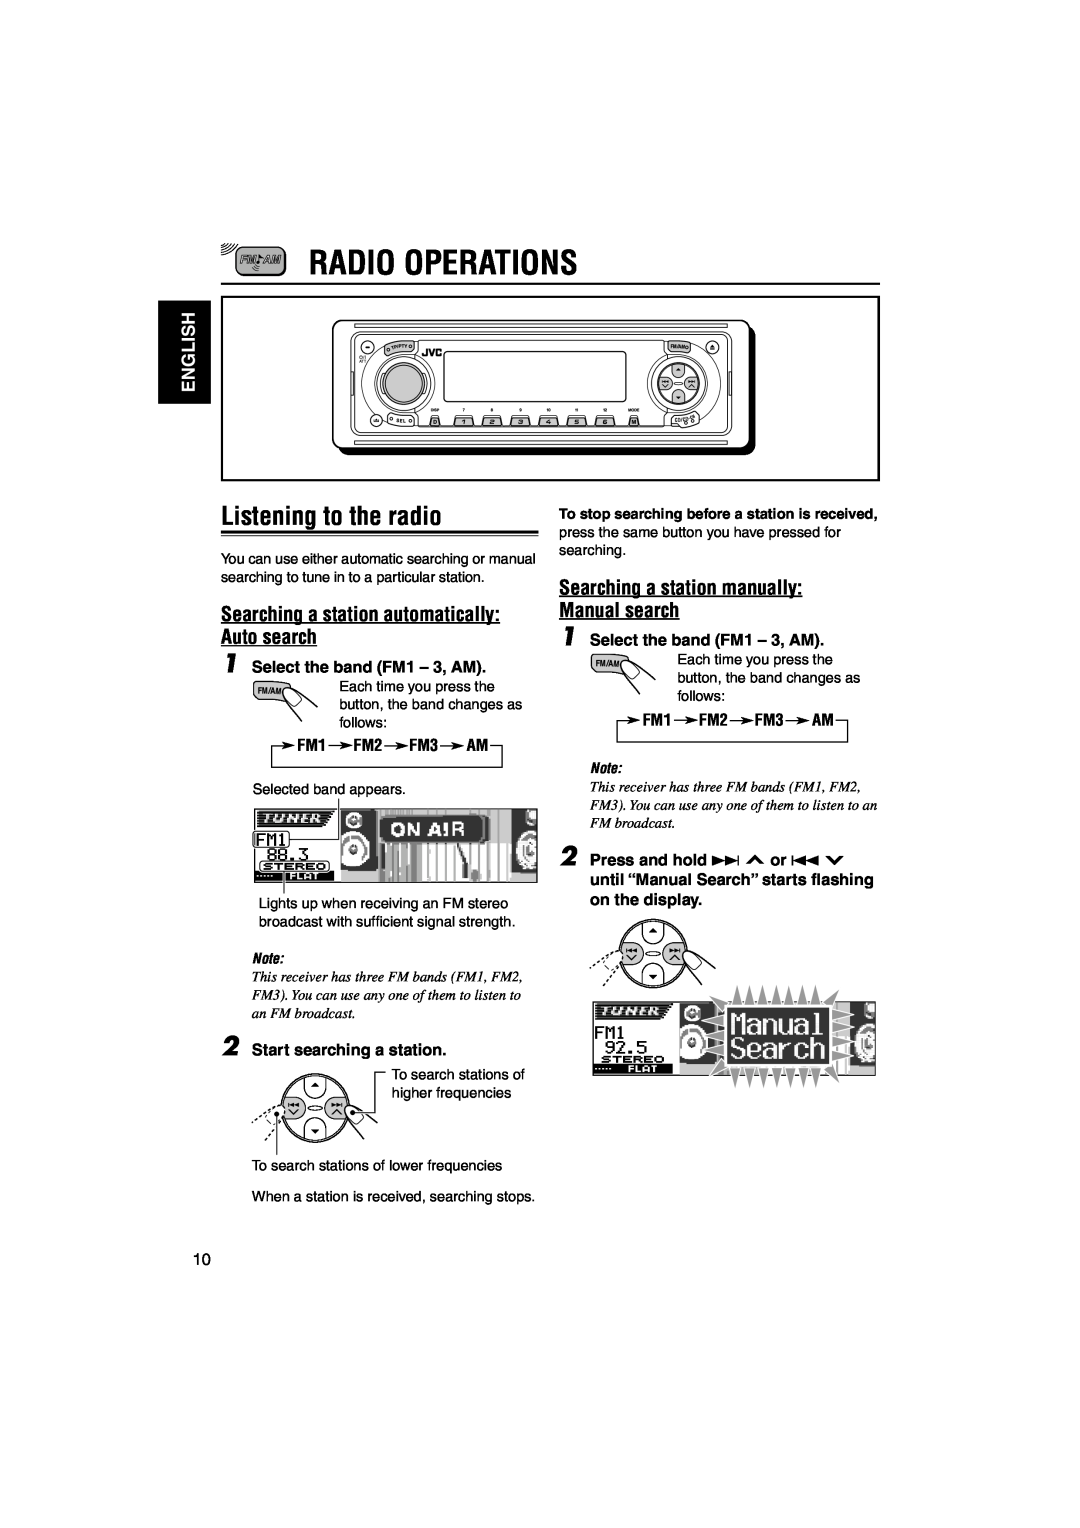 JVC KD-LH1101 manual Radio Operations, Listening to the radio, Searching a station automatically Auto search, English 